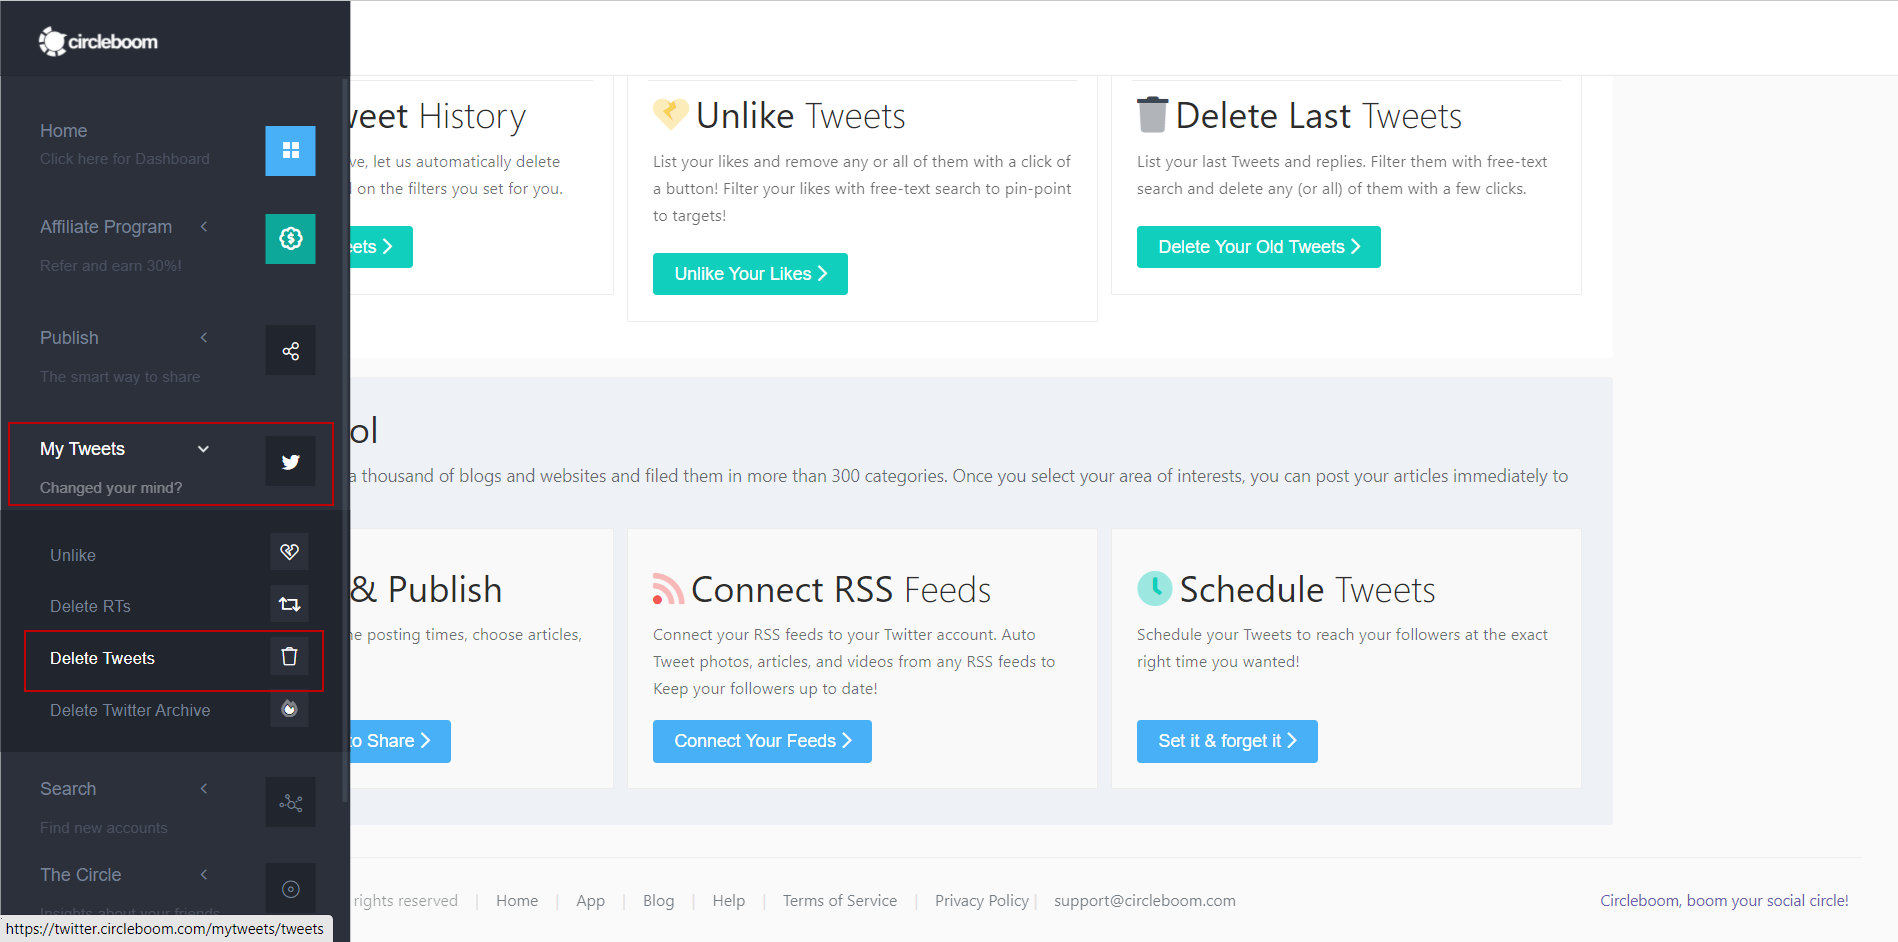 Delete Tweets section on Circleboom Twitter where you can delete all your tweets in bulk or selectively!